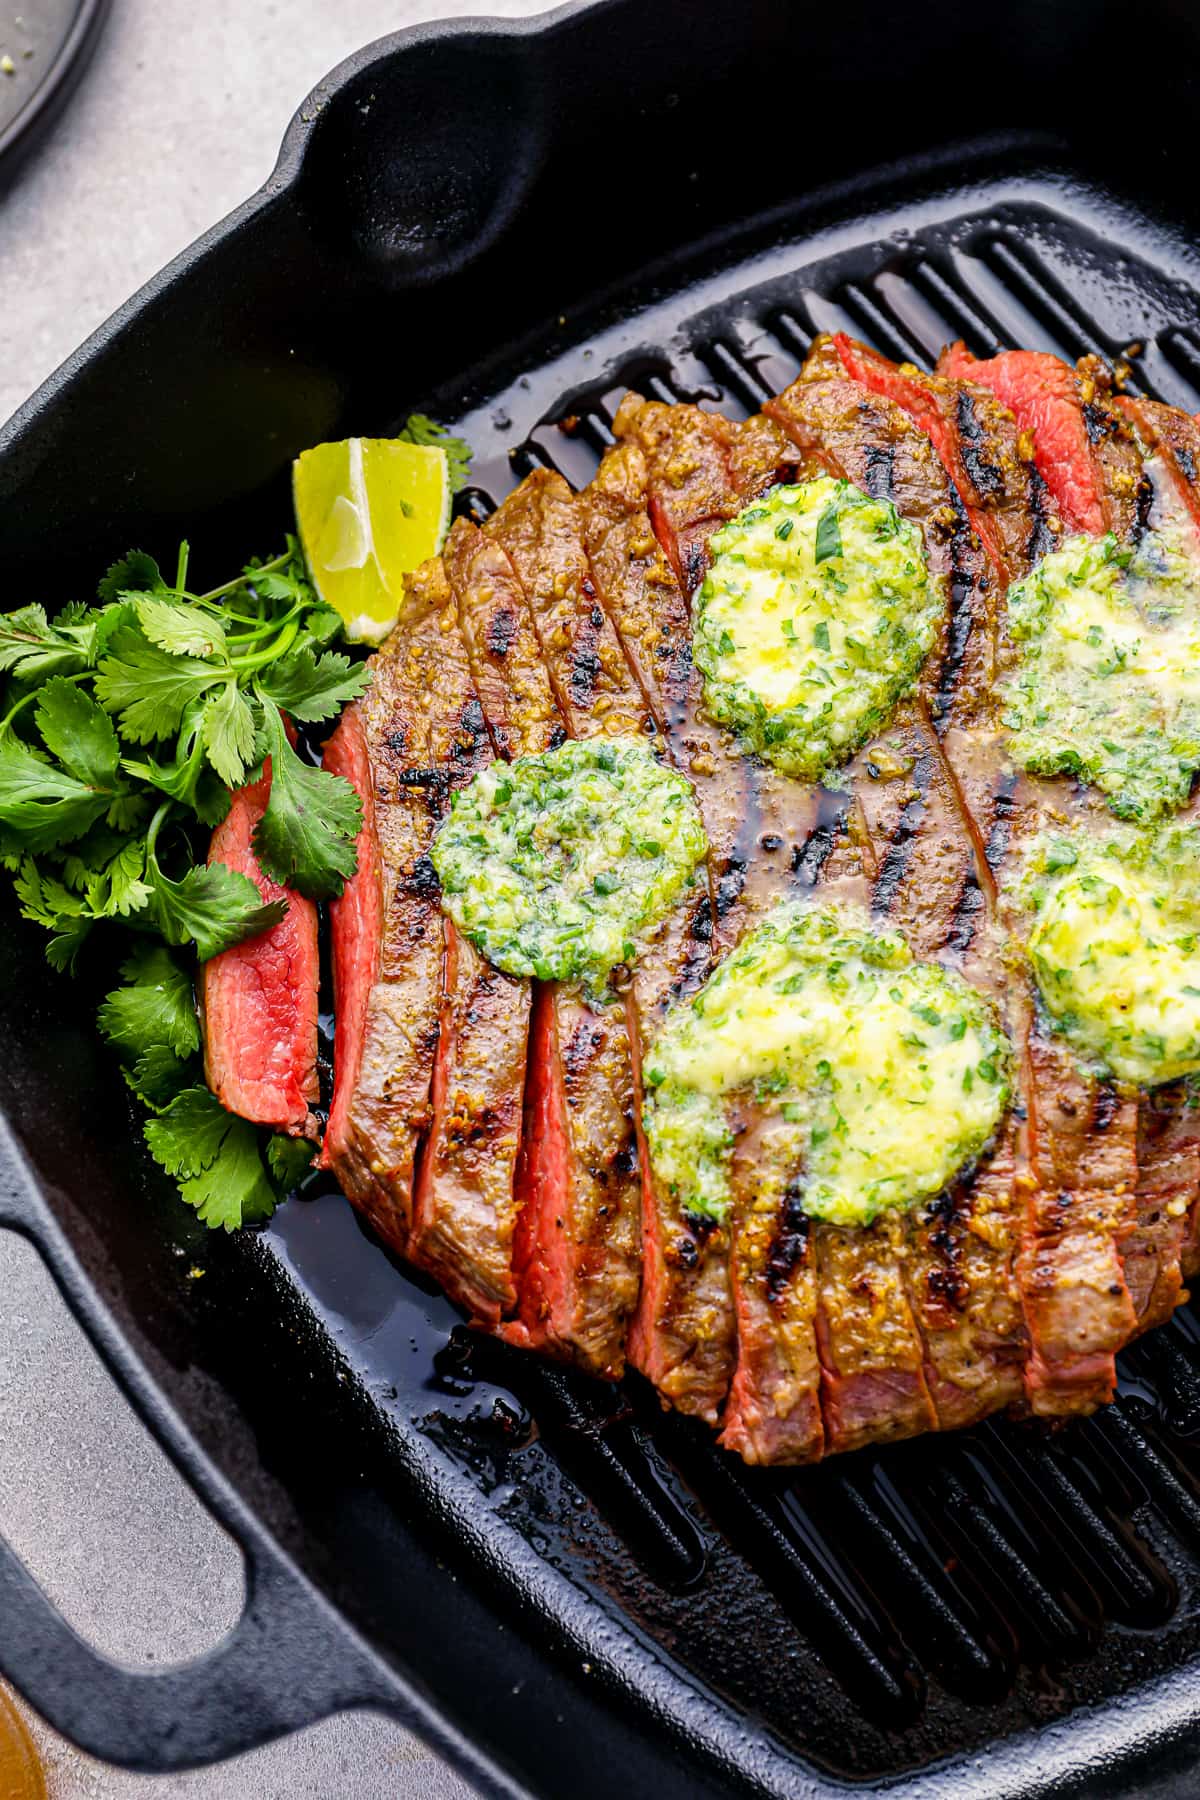 grilled flank steak sits in a black grill pan